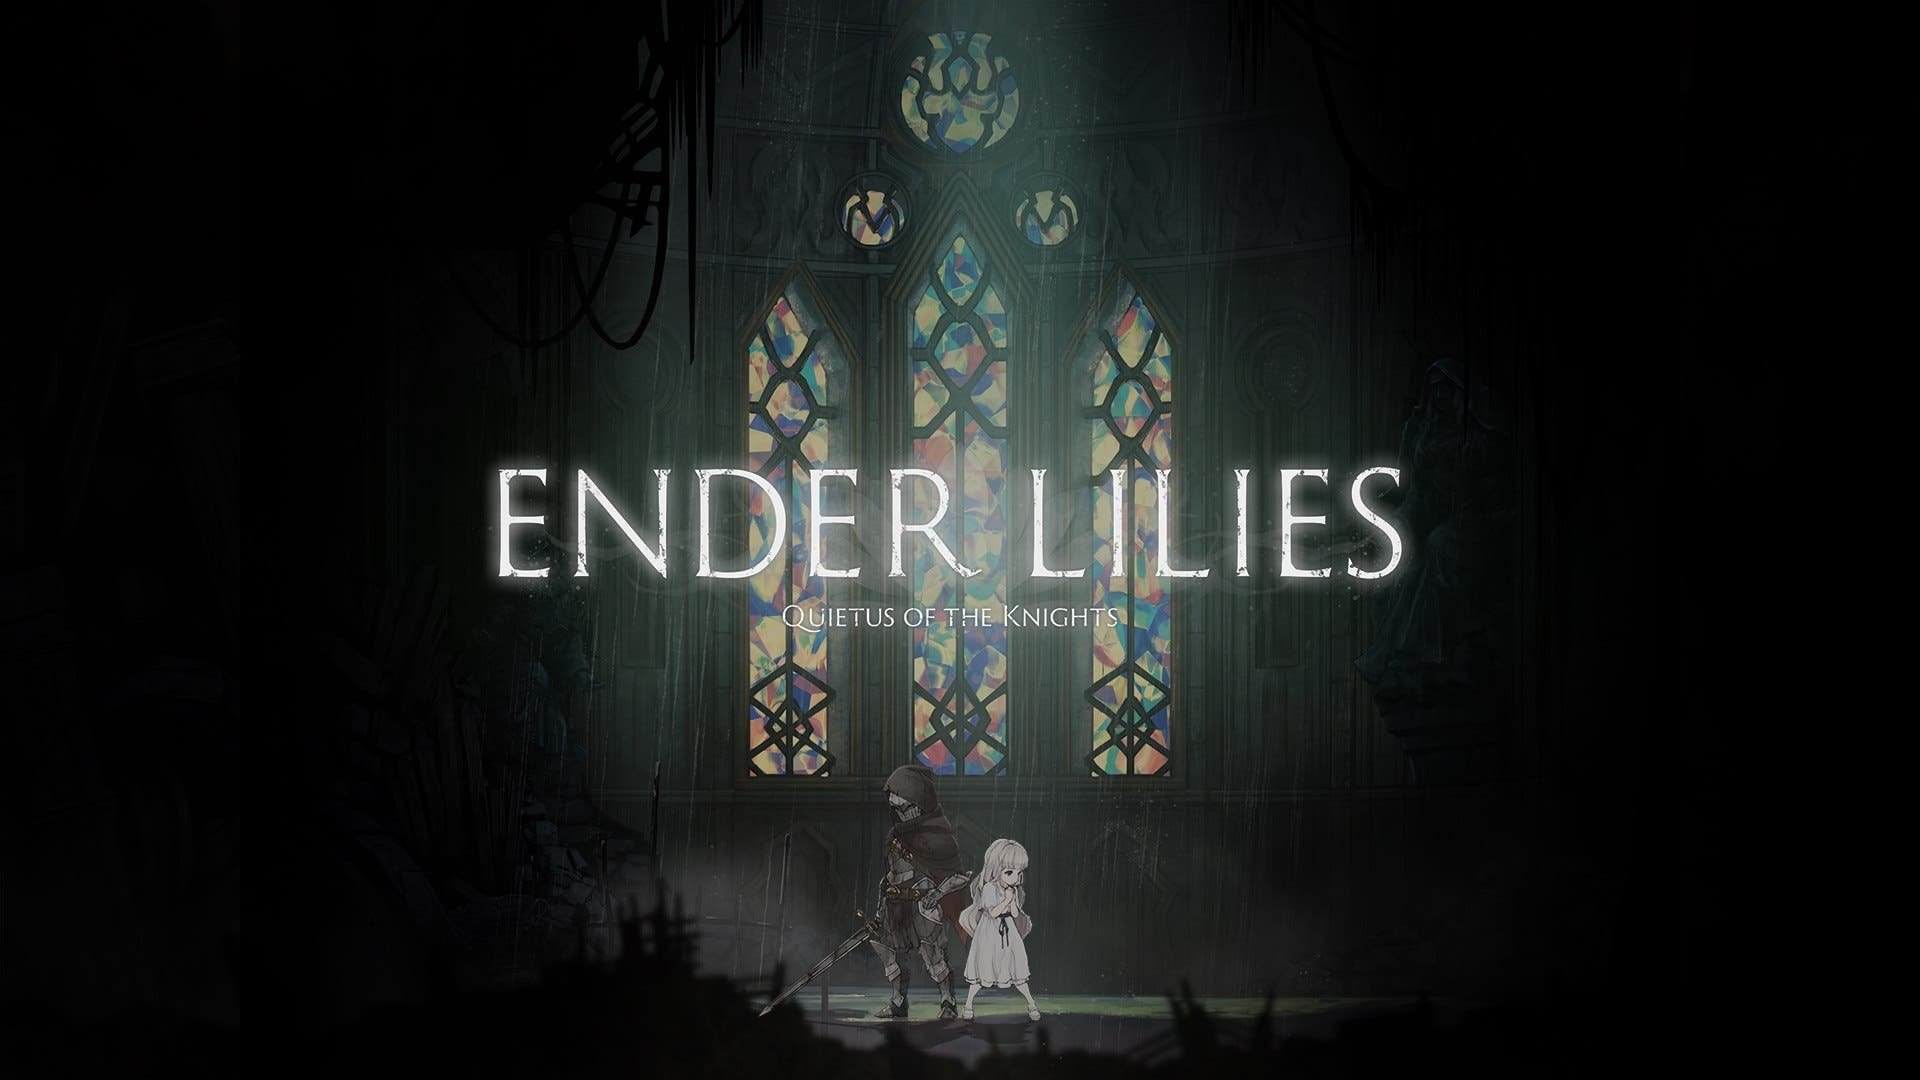 Ender lilies quietus of the knights steam фото 12